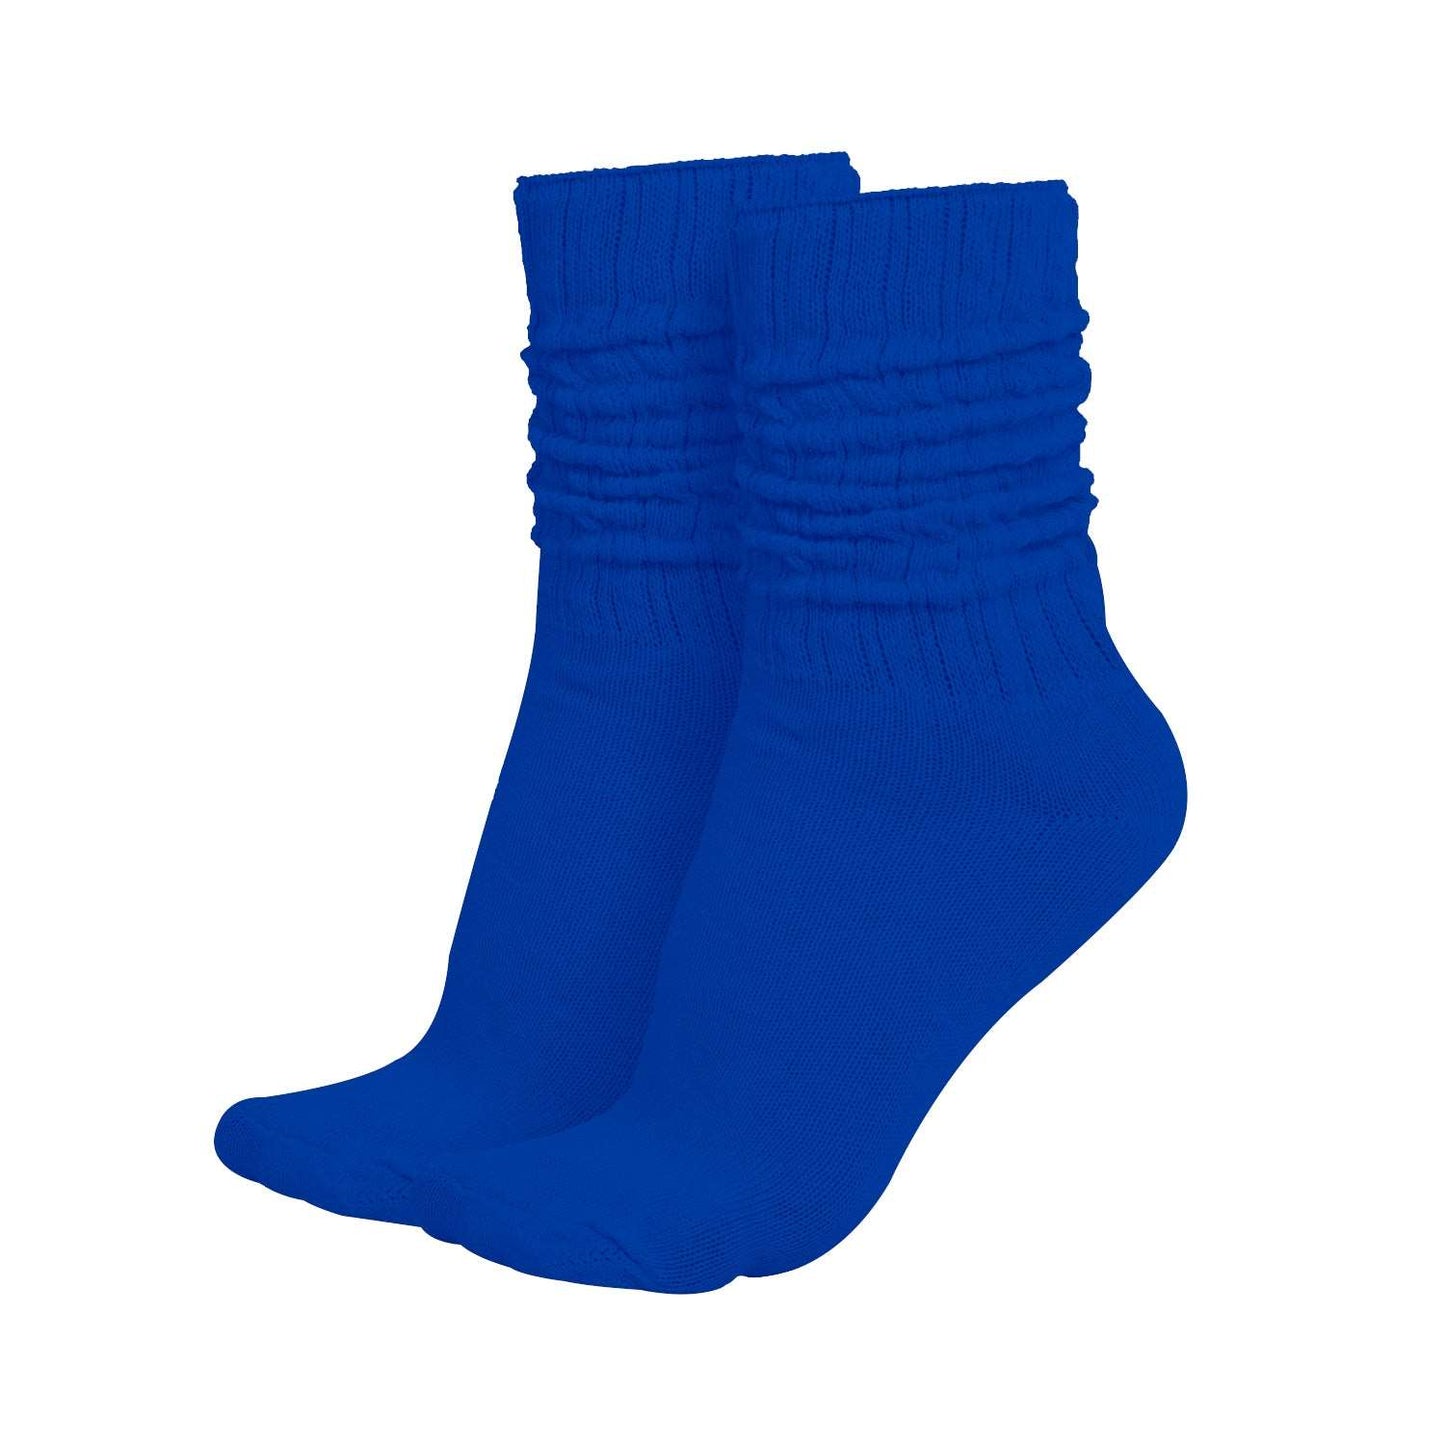 MDR Lightweight Cotton Slouch Socks For Women and Men 1 Pair Made in USA Size 9 to 11 (Royal Blue)